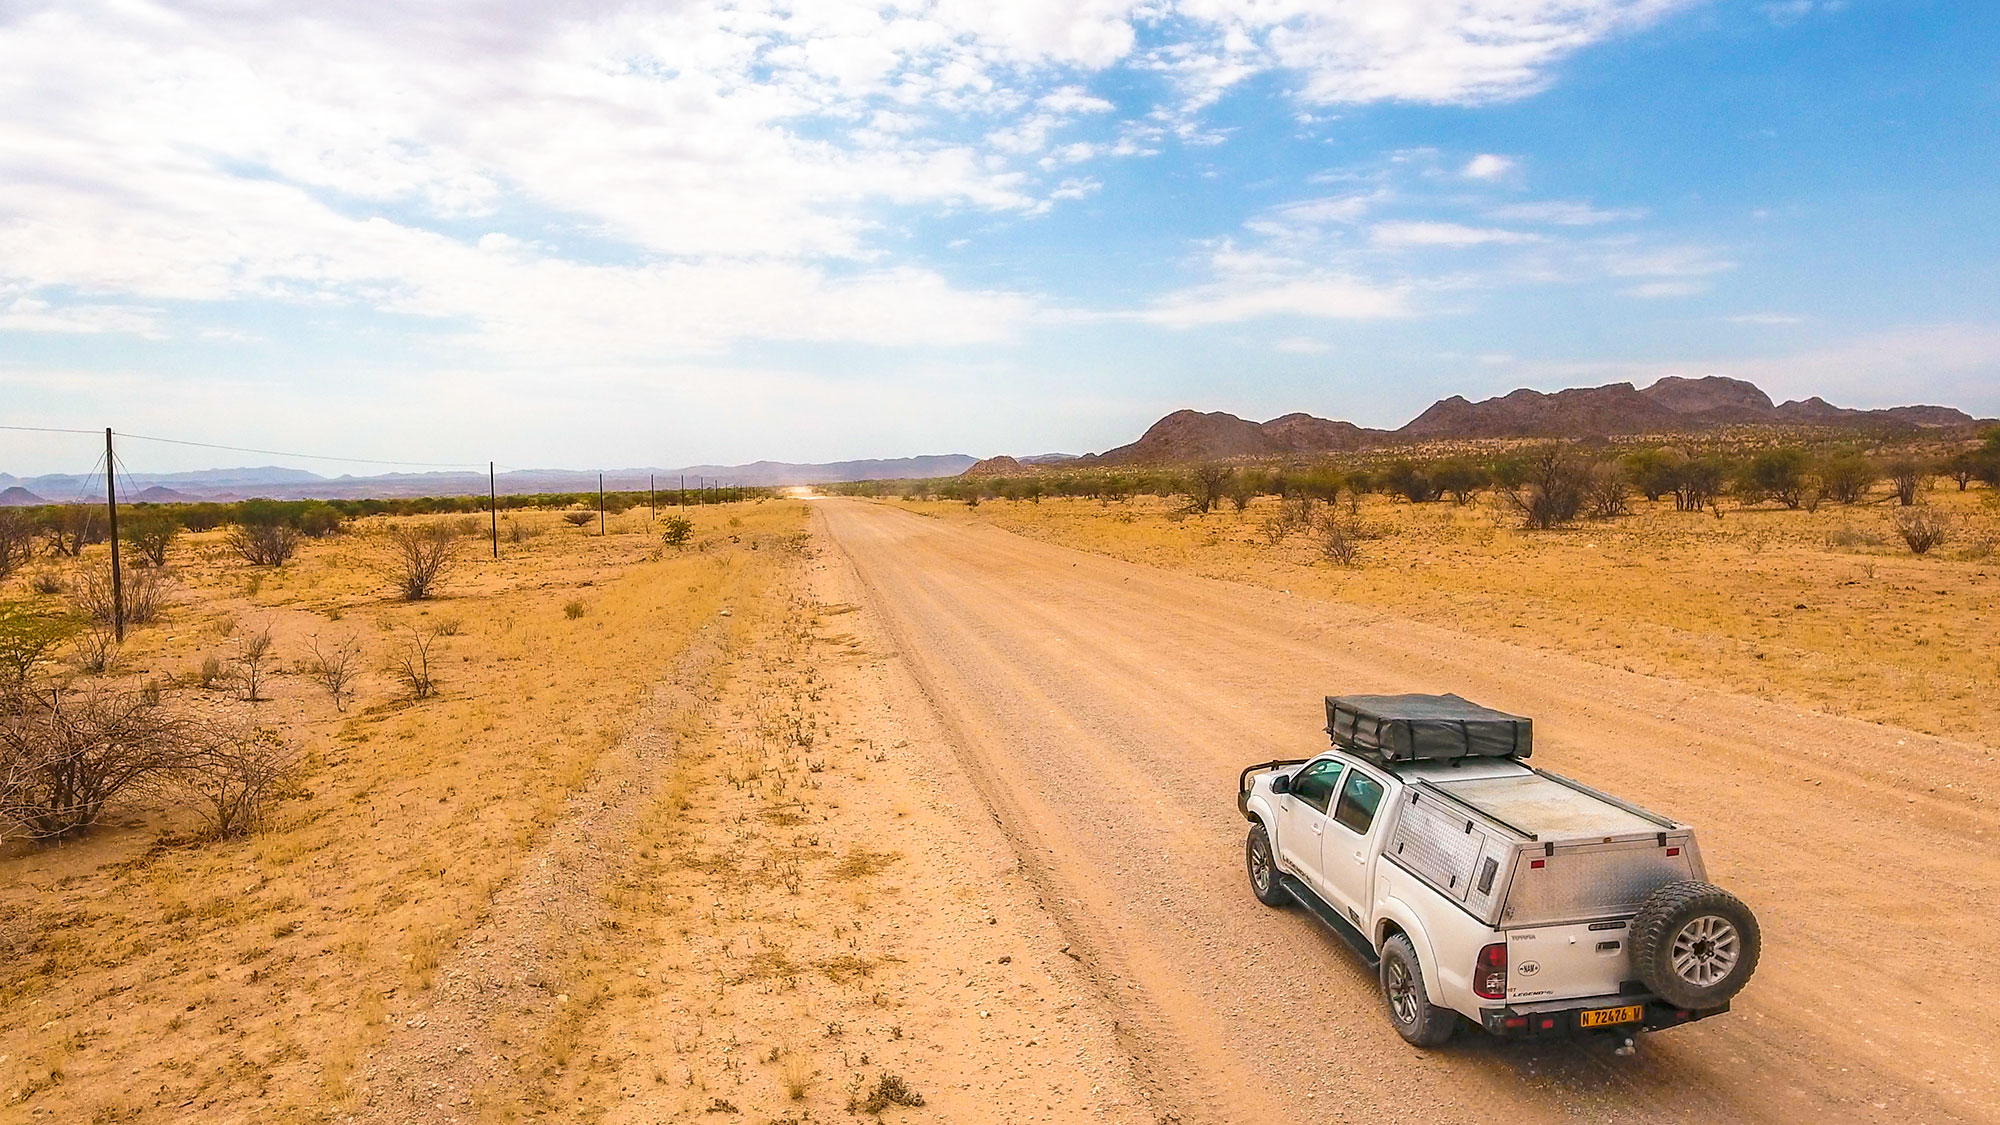 Drone view of Toyota Hilux self-drive through the desert in Damaraland, Namibia, Africa